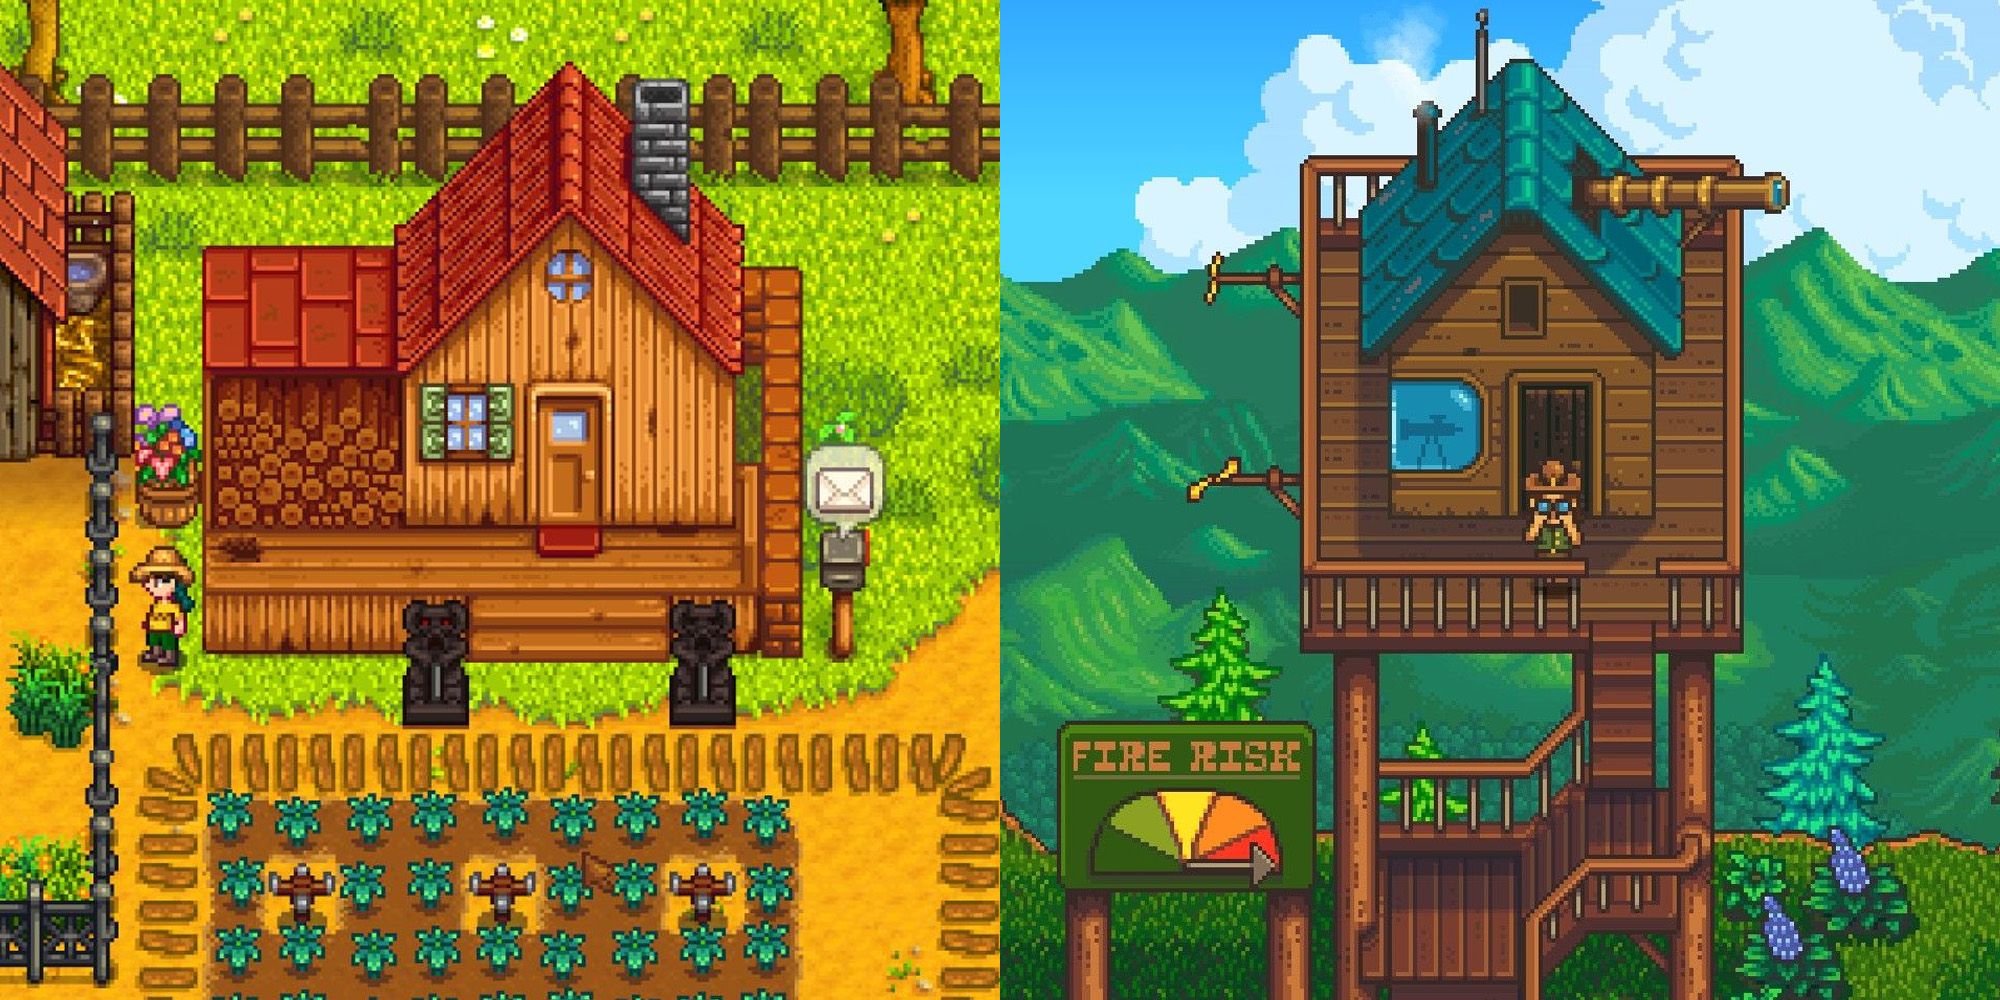 Stardew Valley - Stardew Valley 1.3 (Multiplayer Update) is now available!